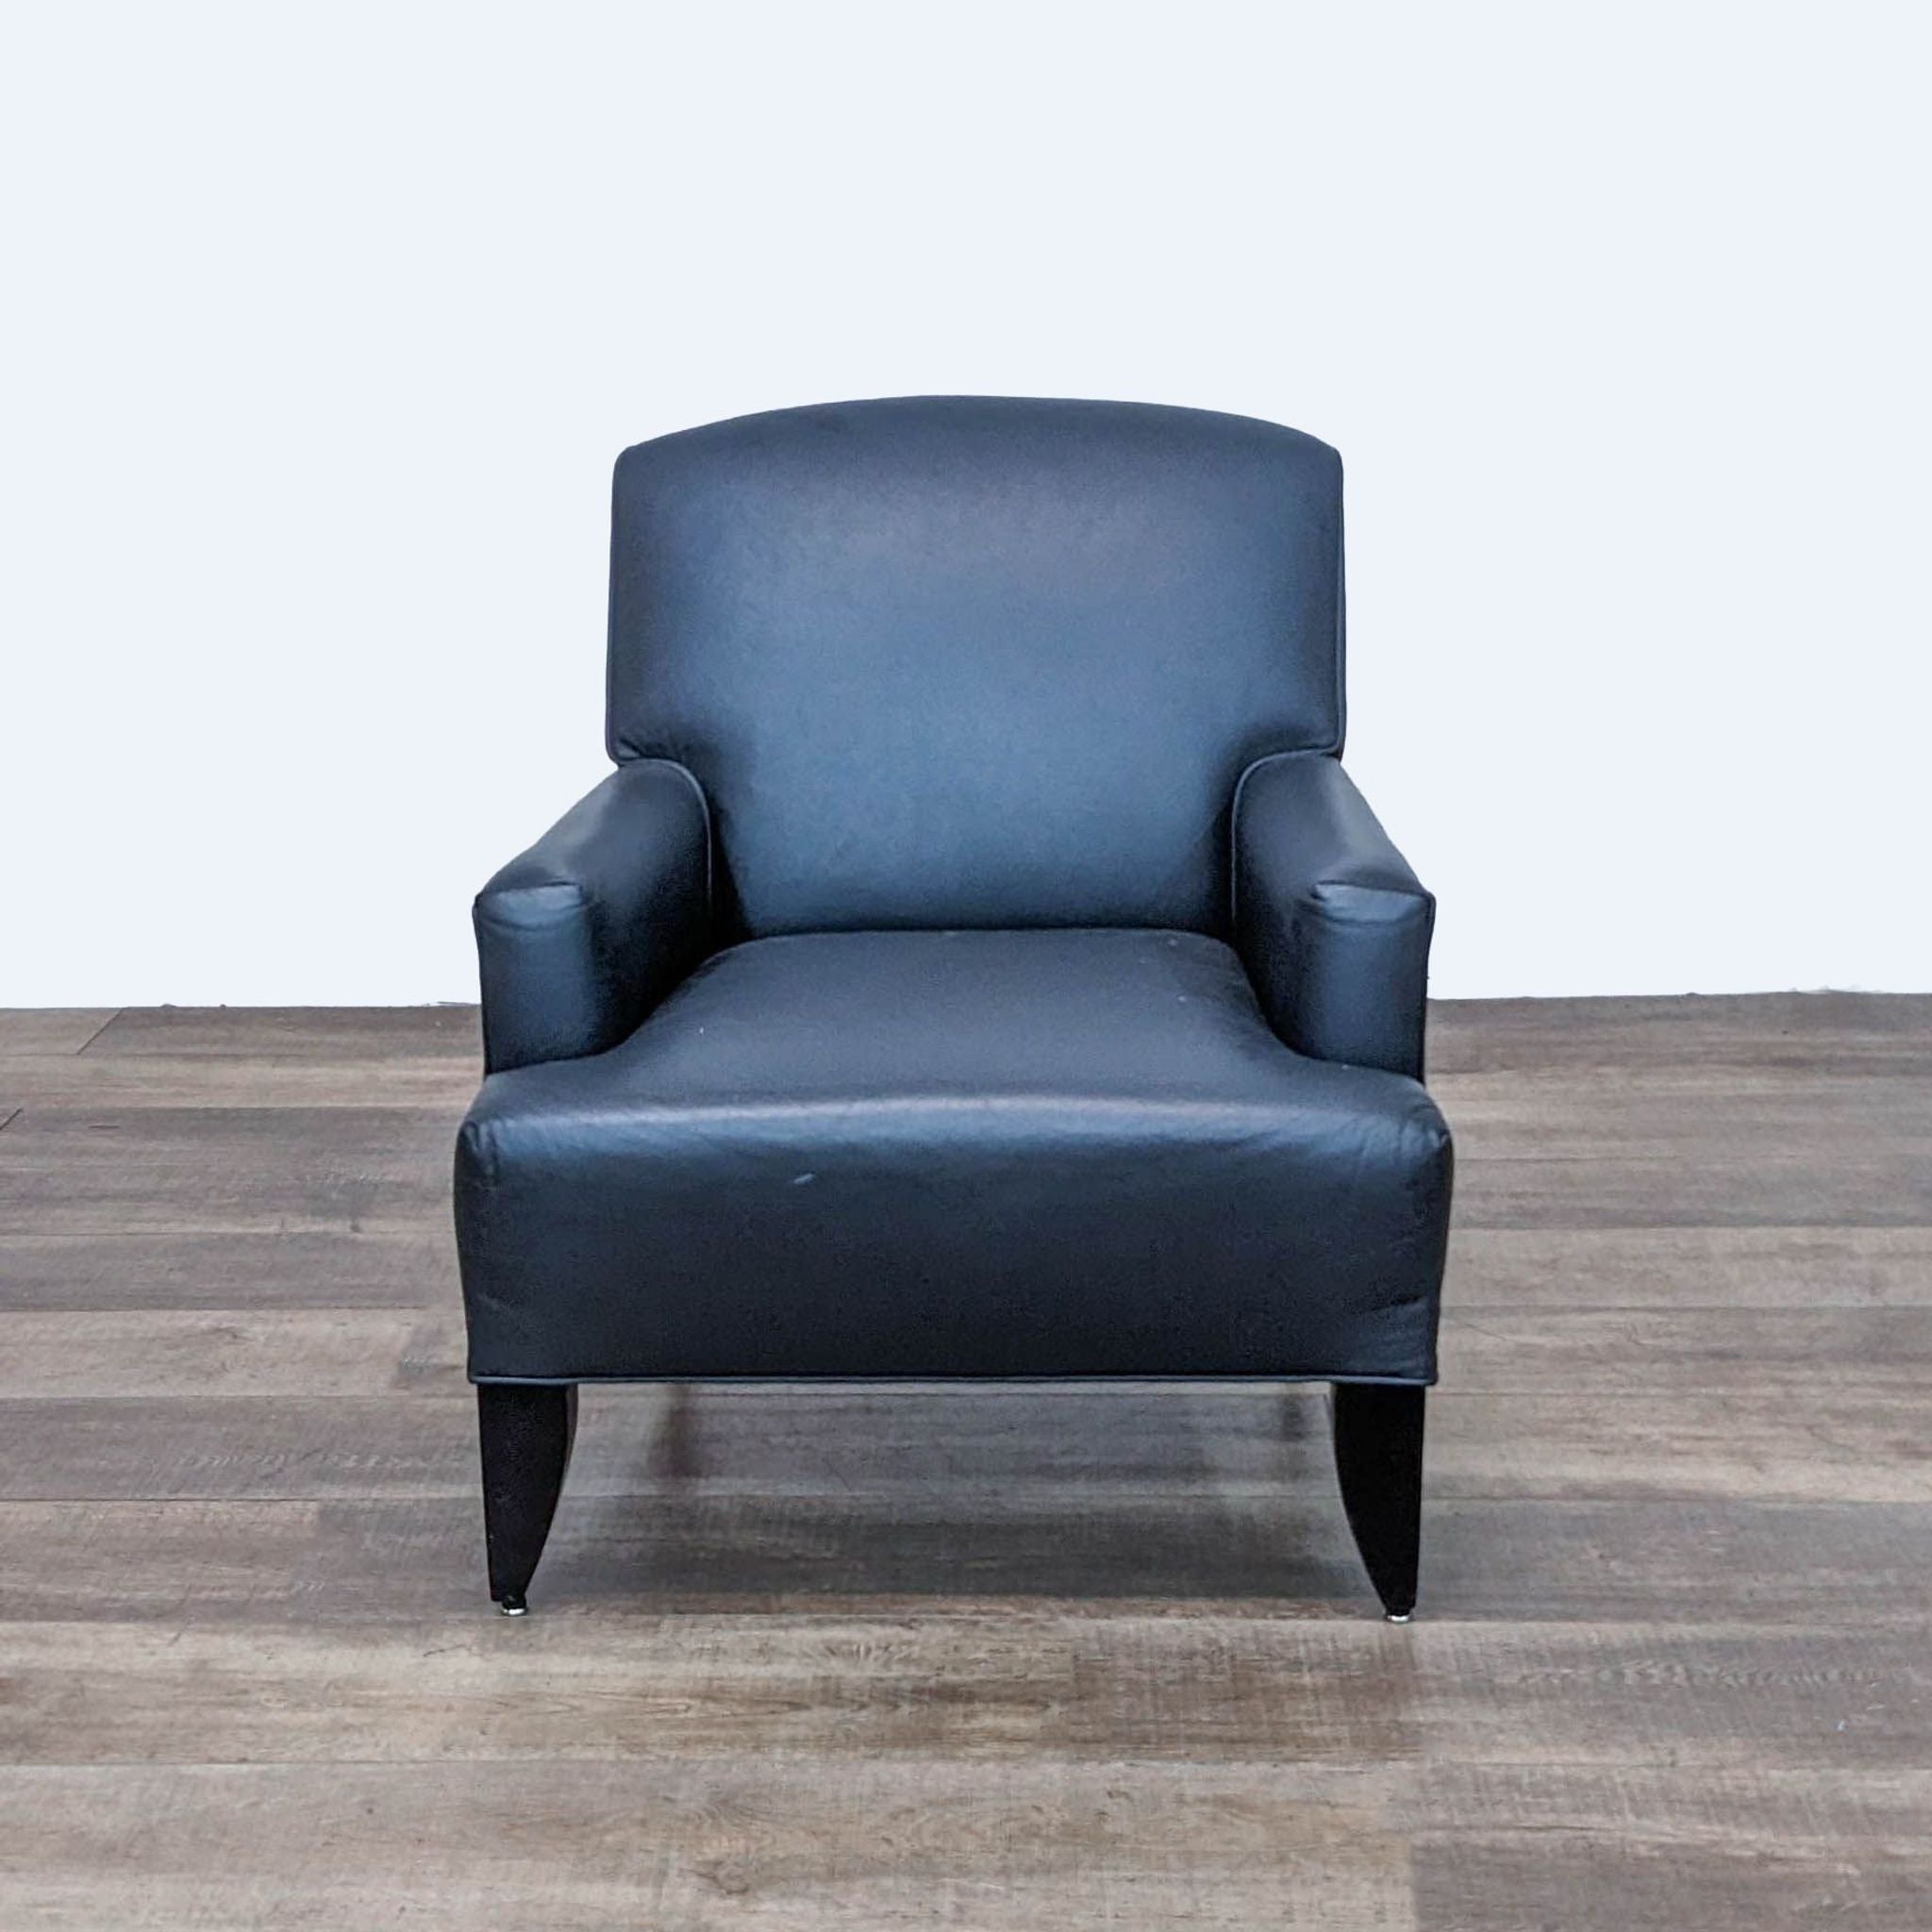 Reperch navy blue leather club chair with arched back and tapered wooden feet, front view on wood floor.